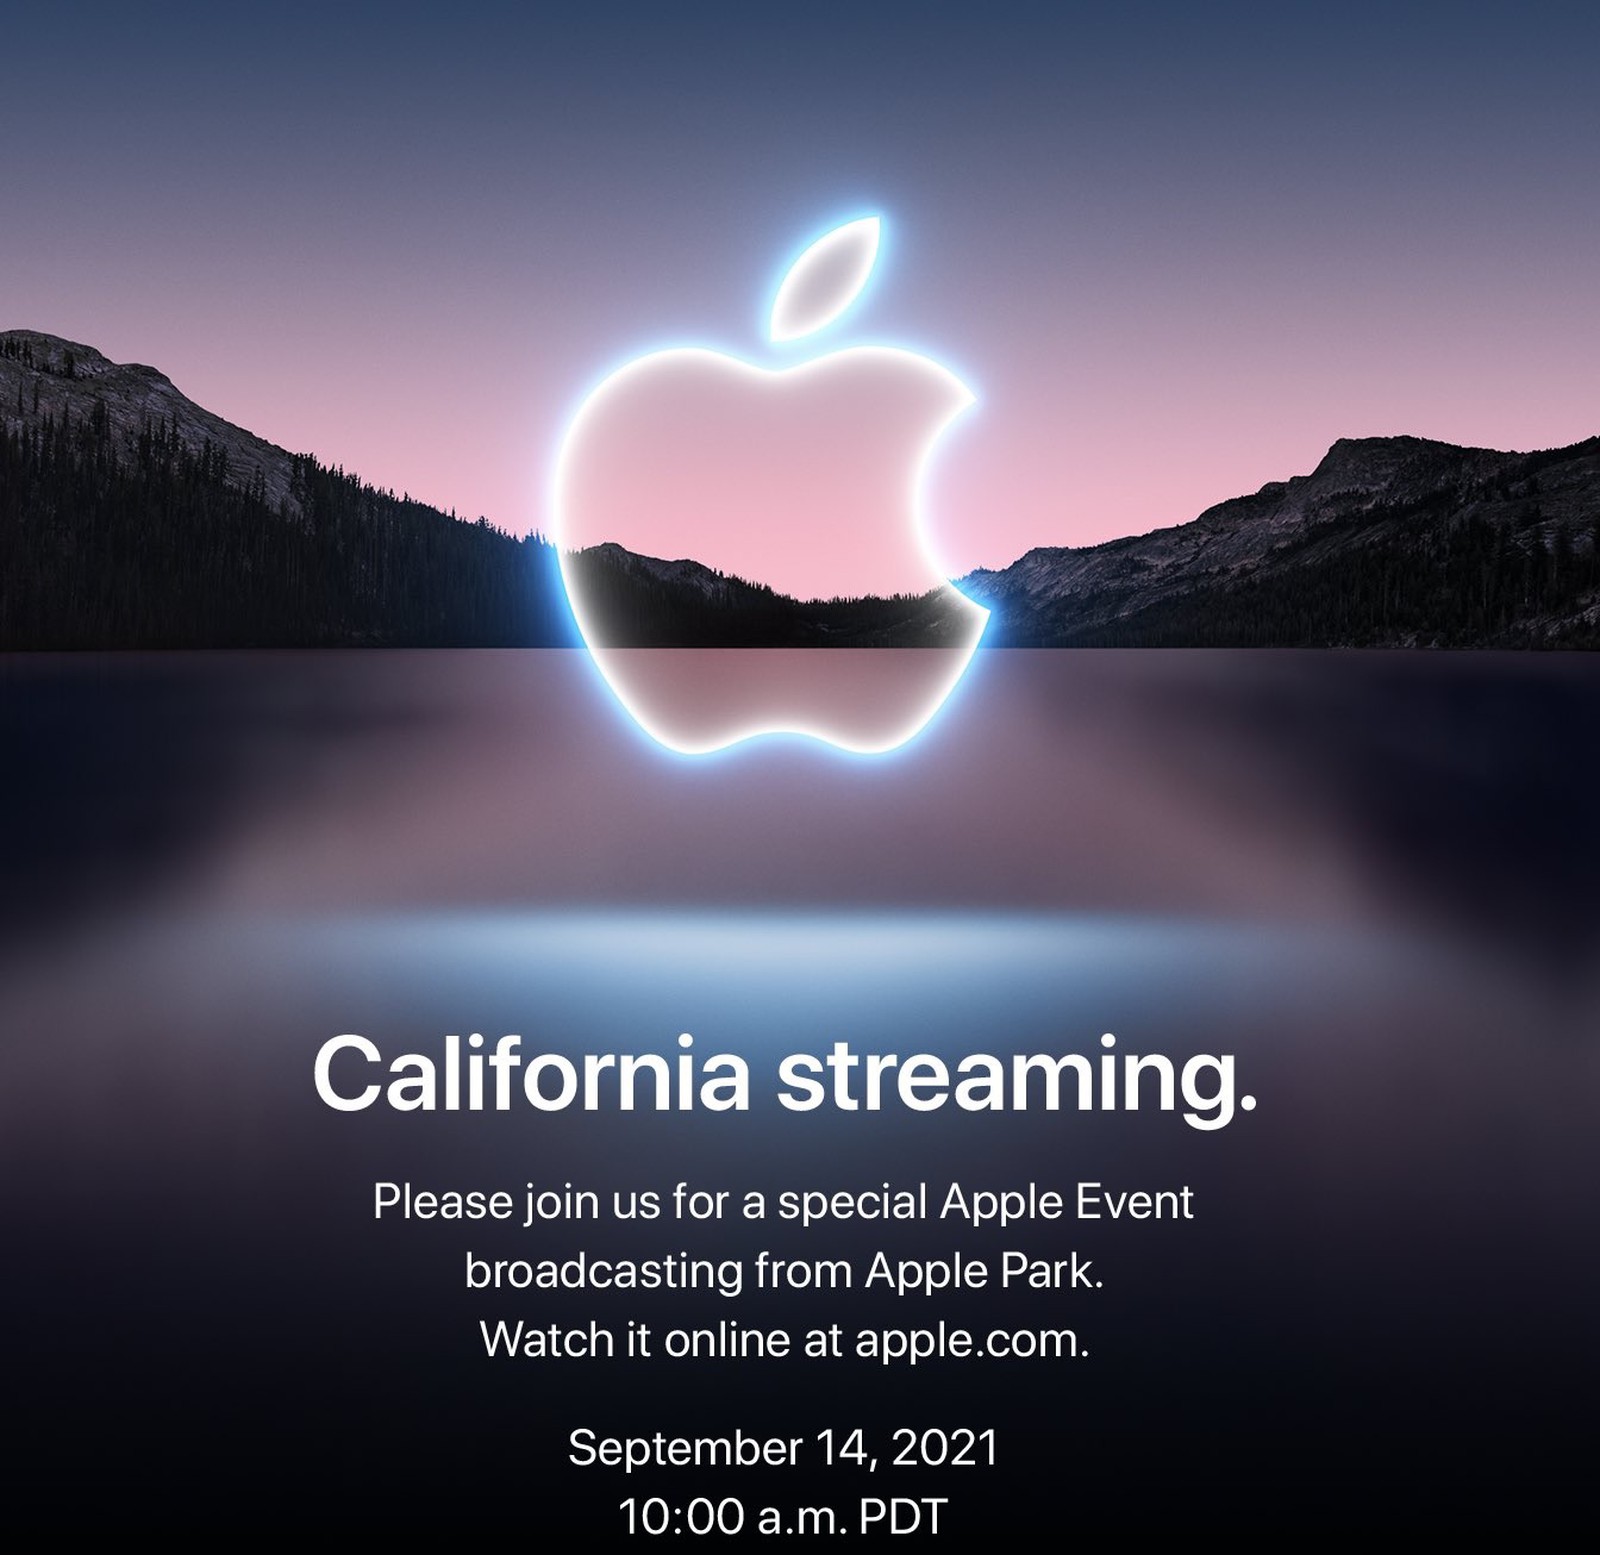 Apple’s event announcement: “California Streaming” on September 14 With ...